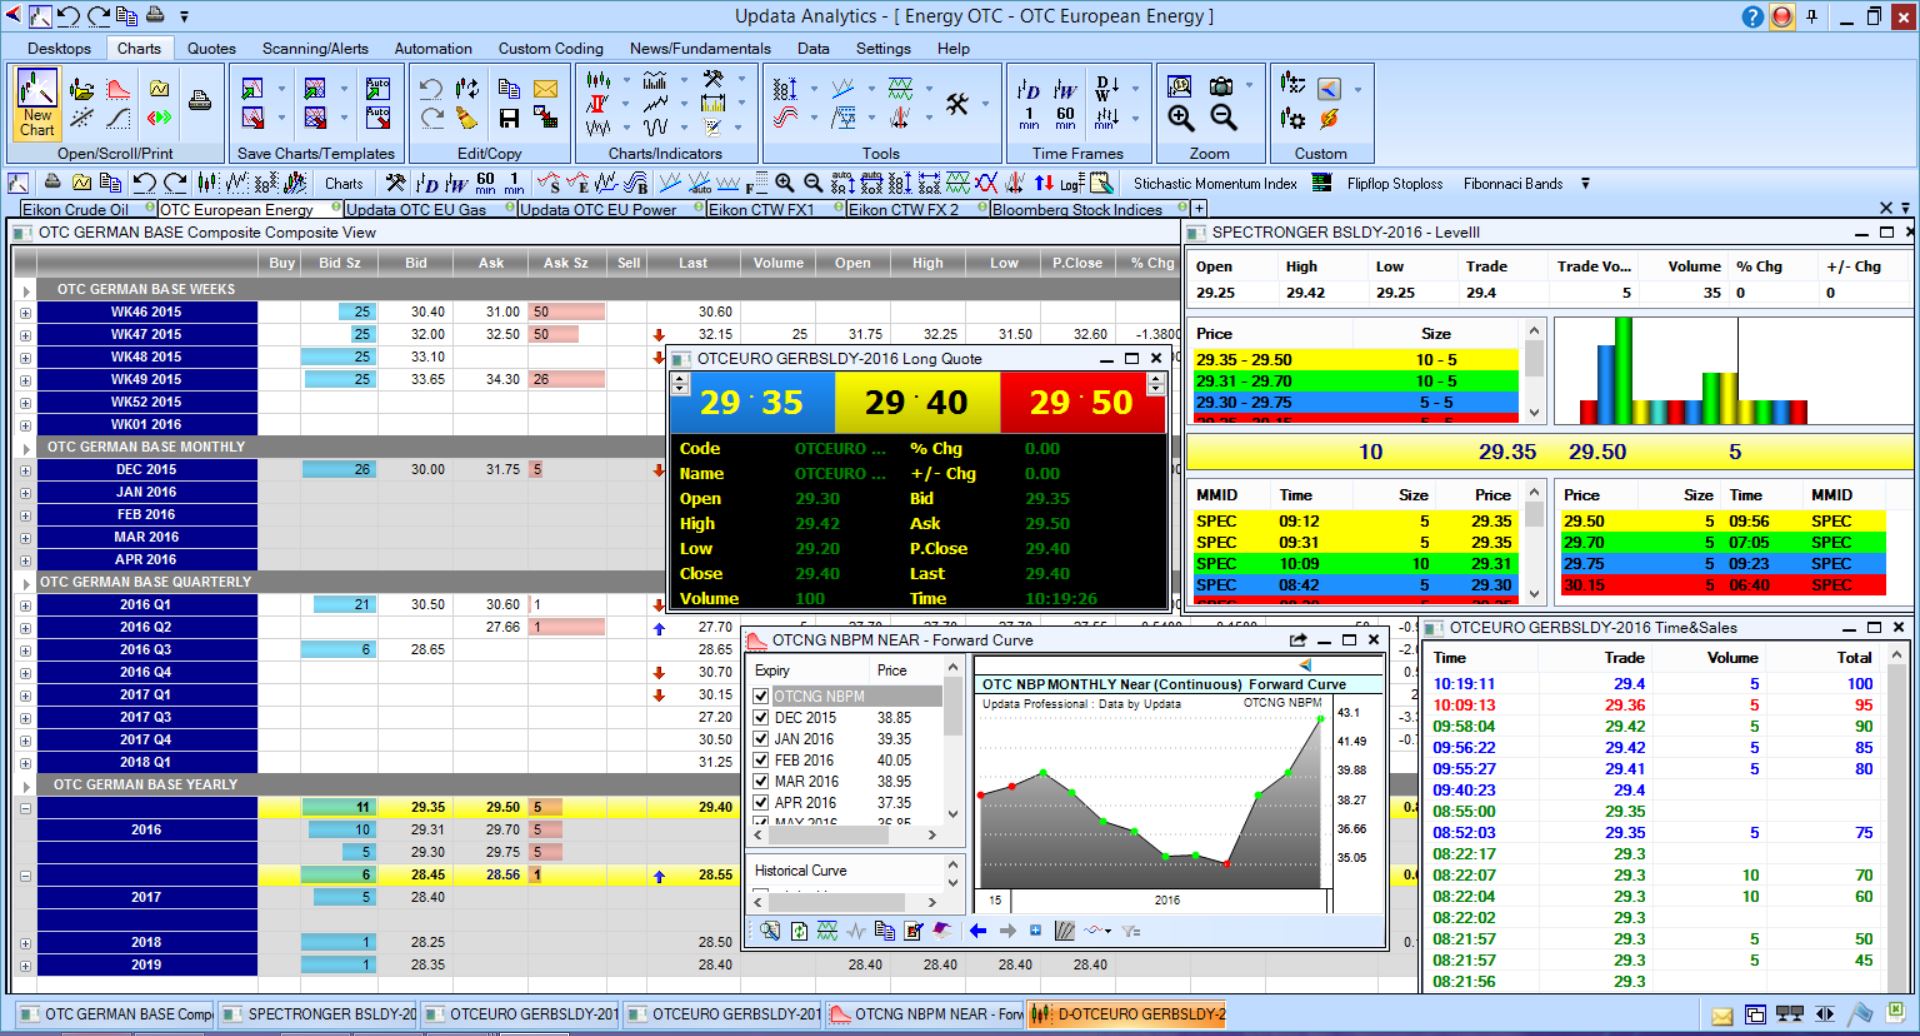 Data visualization and chart analytics tools for real time OTC energy broker data 